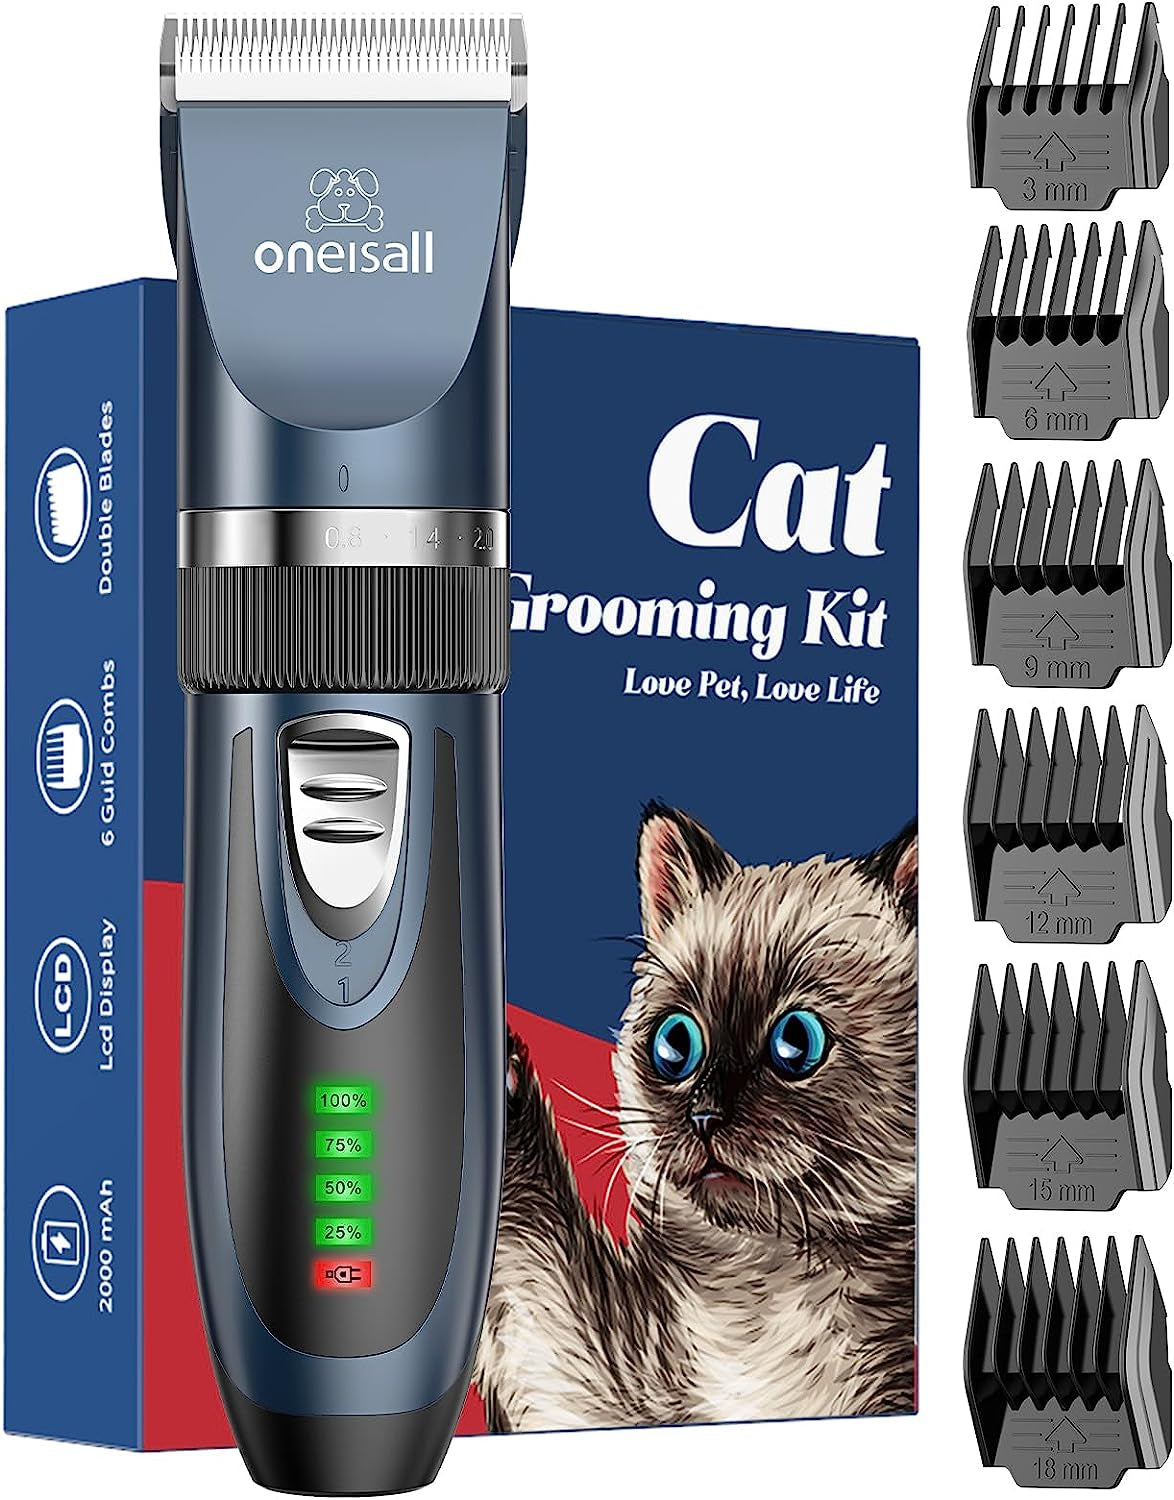 Cat Grooming Clippers for Matted Hair, 2-Speed Cat Grooming Kit Cordless Low Noise Pet Hair Clipper Trimmer for Dogs Cats Animals (Blue)